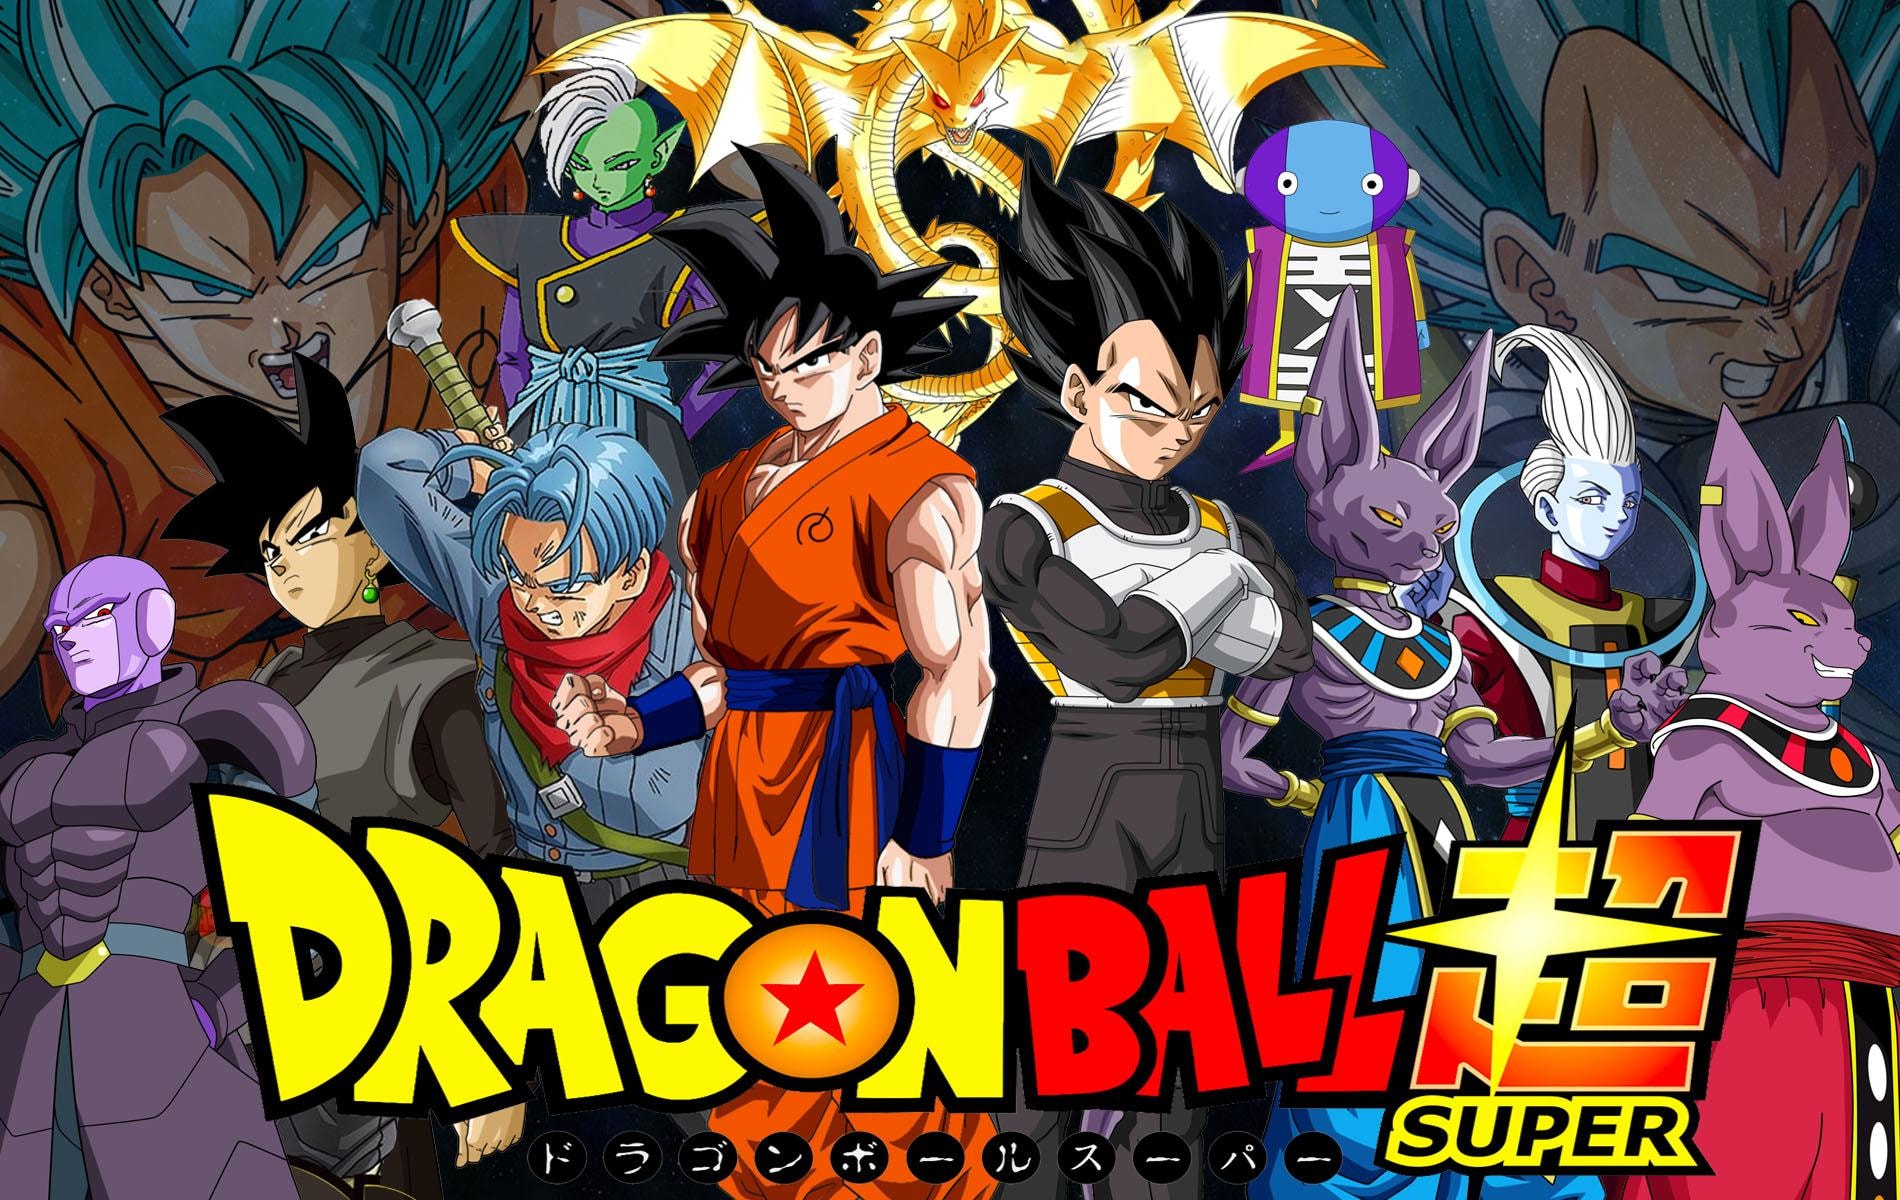 Dragon Ball Super Chapter 56 Updates, Plot Spoilers and Leaks